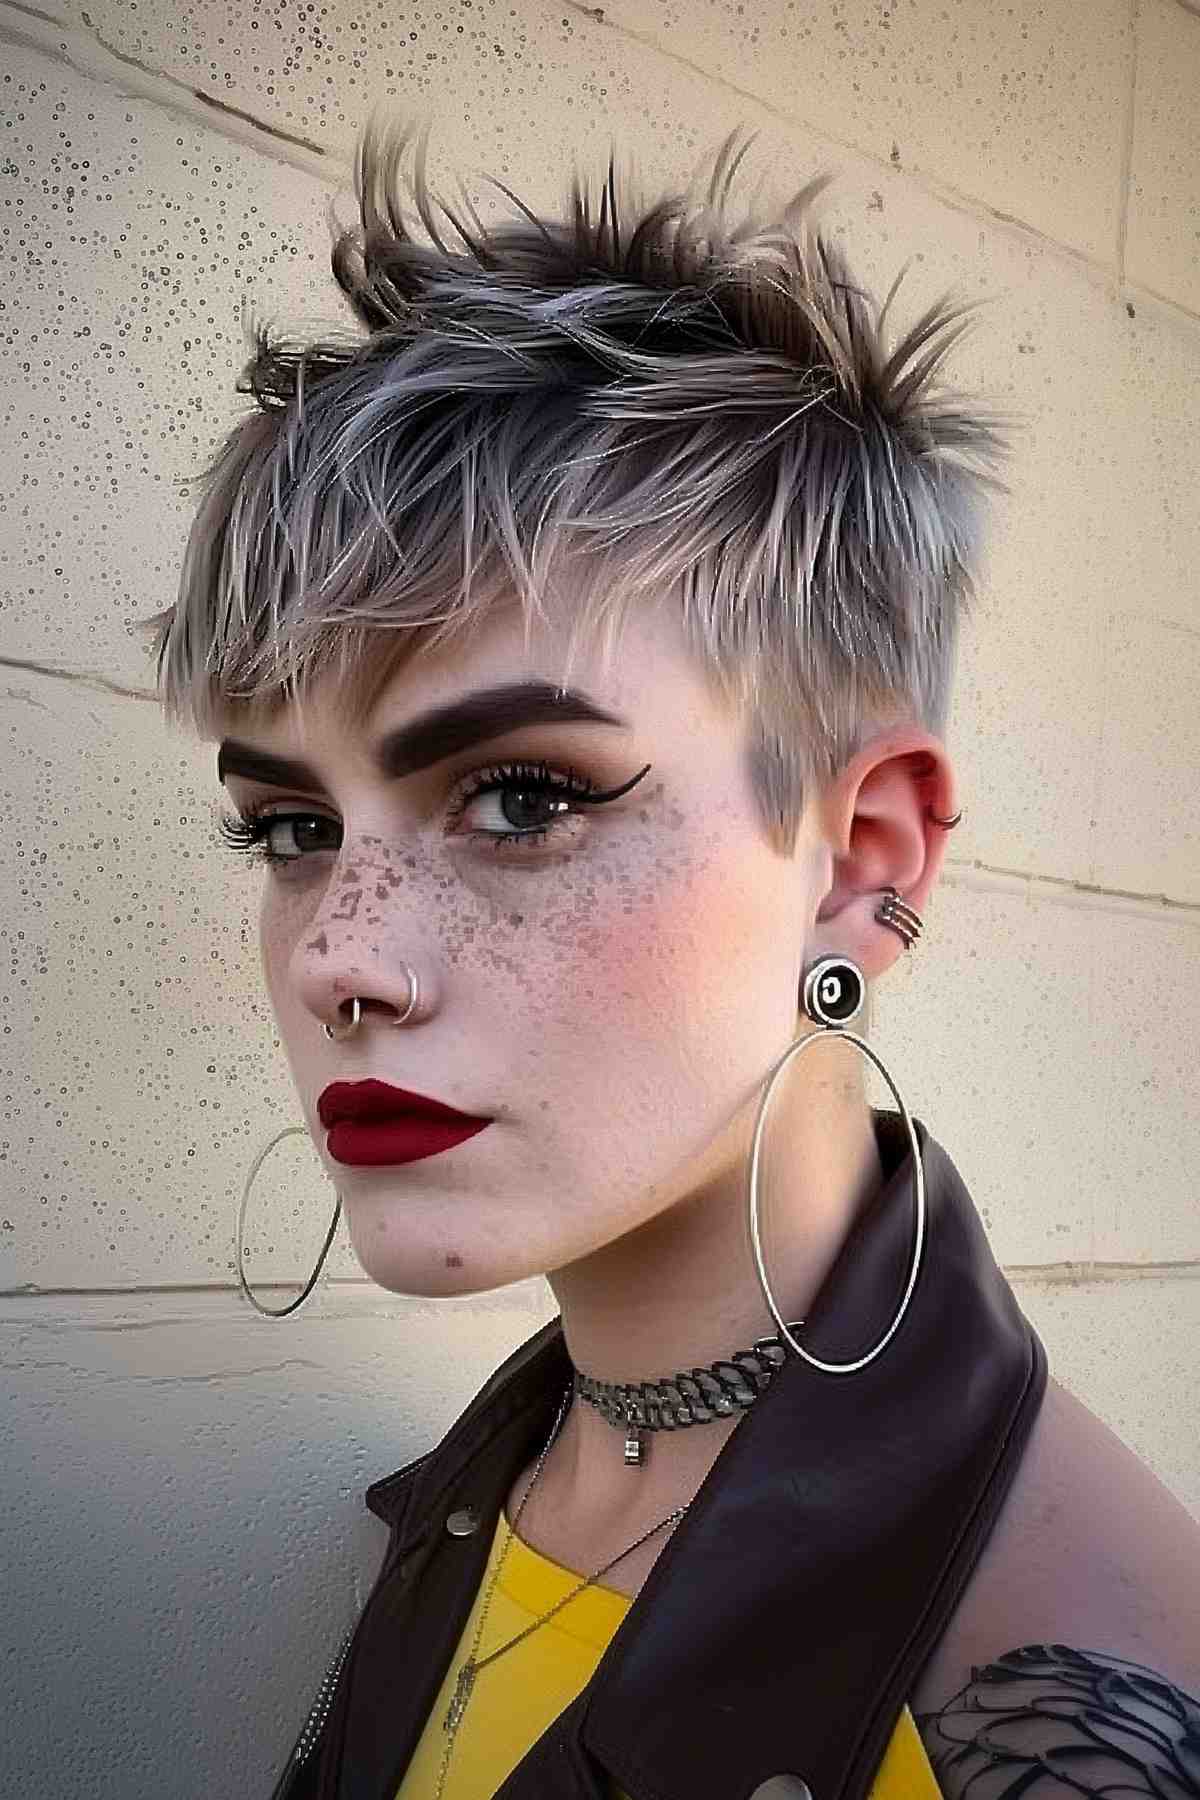 Grunge-inspired punk pixie cut with textured, choppy top and soft silver color transitioning into darker roots, perfect for an edgy look.